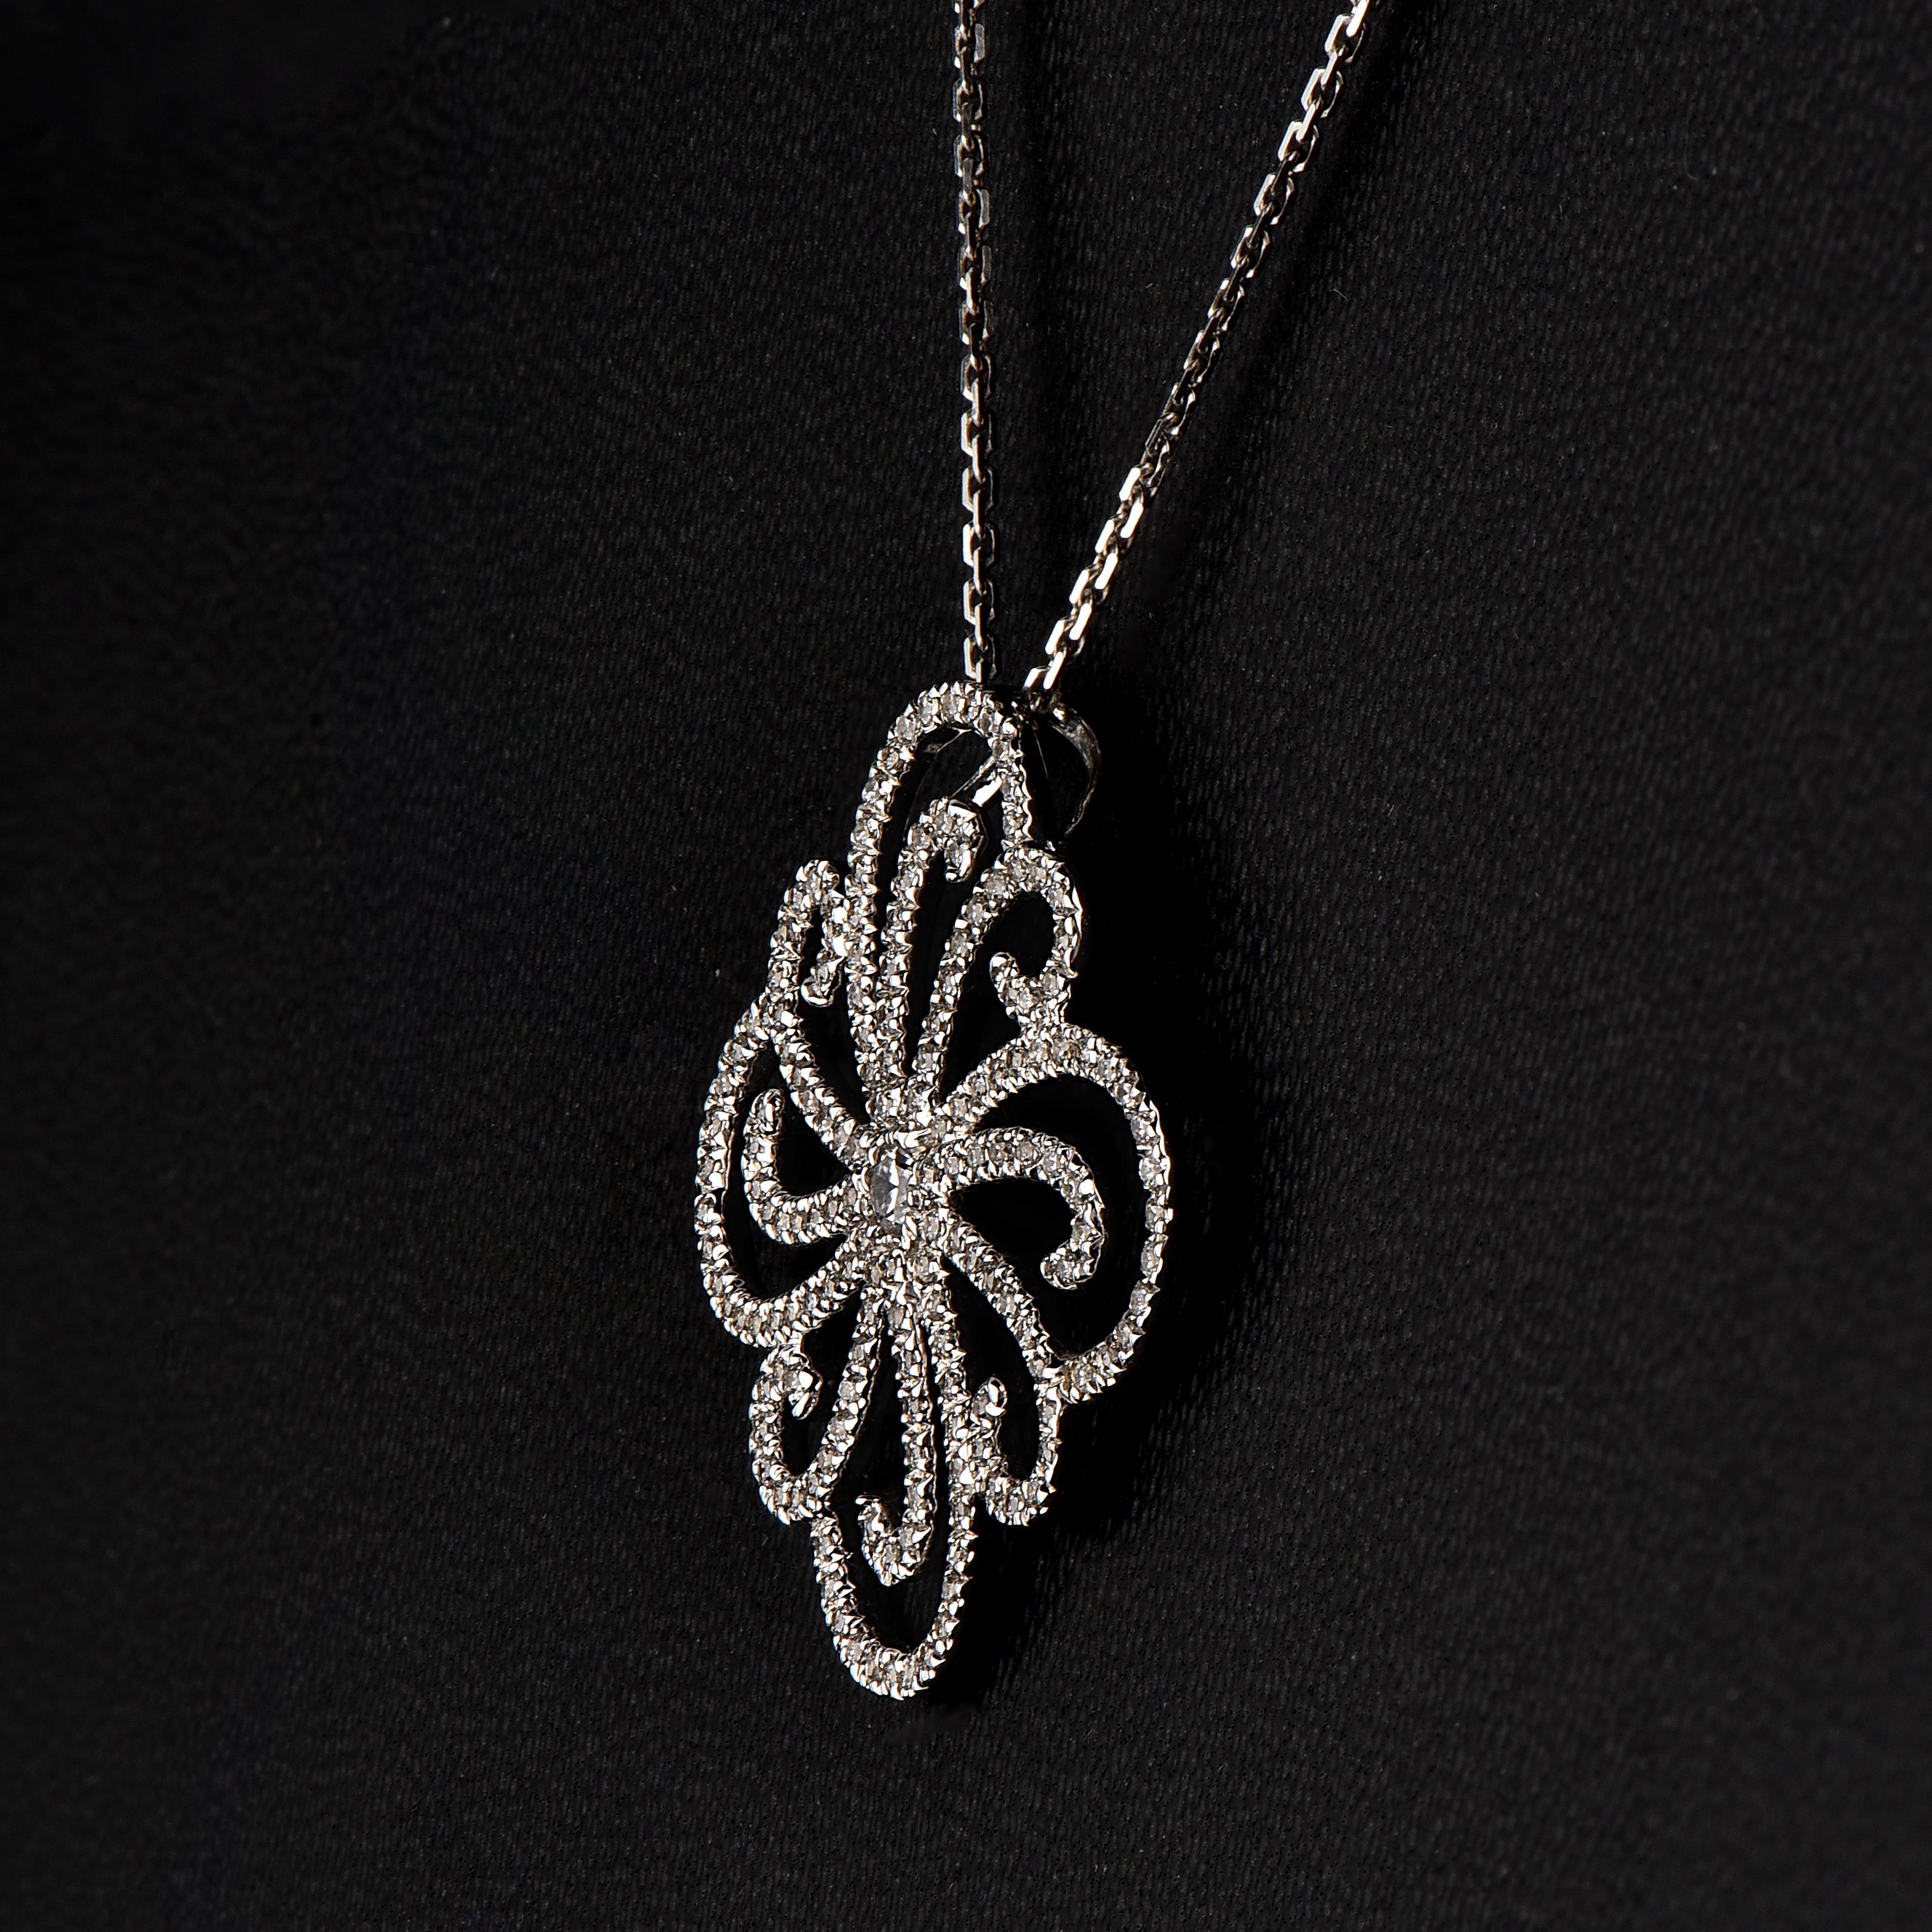 Why blend in when you can stand out with this beautiful diamond studded designer pendant. The pendant is crafted from 18-karat White gold and features Round Brilliant 165 white diamonds set in micro-pave setting, H-I color I1 clarity and a high